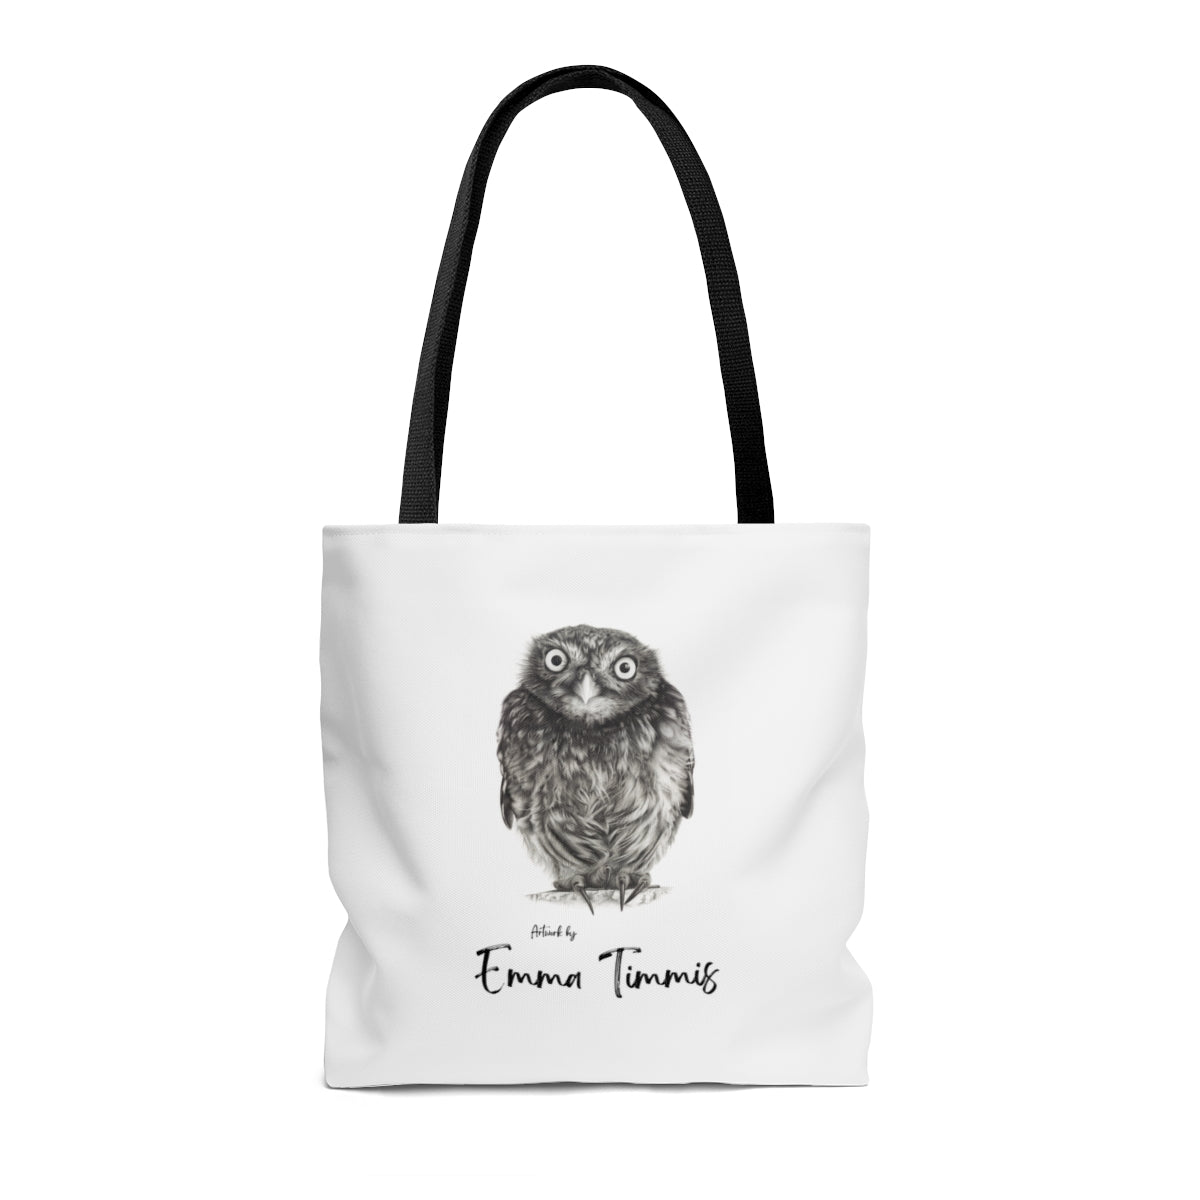 Little Owl Tote Bag with FREE SHIPPING